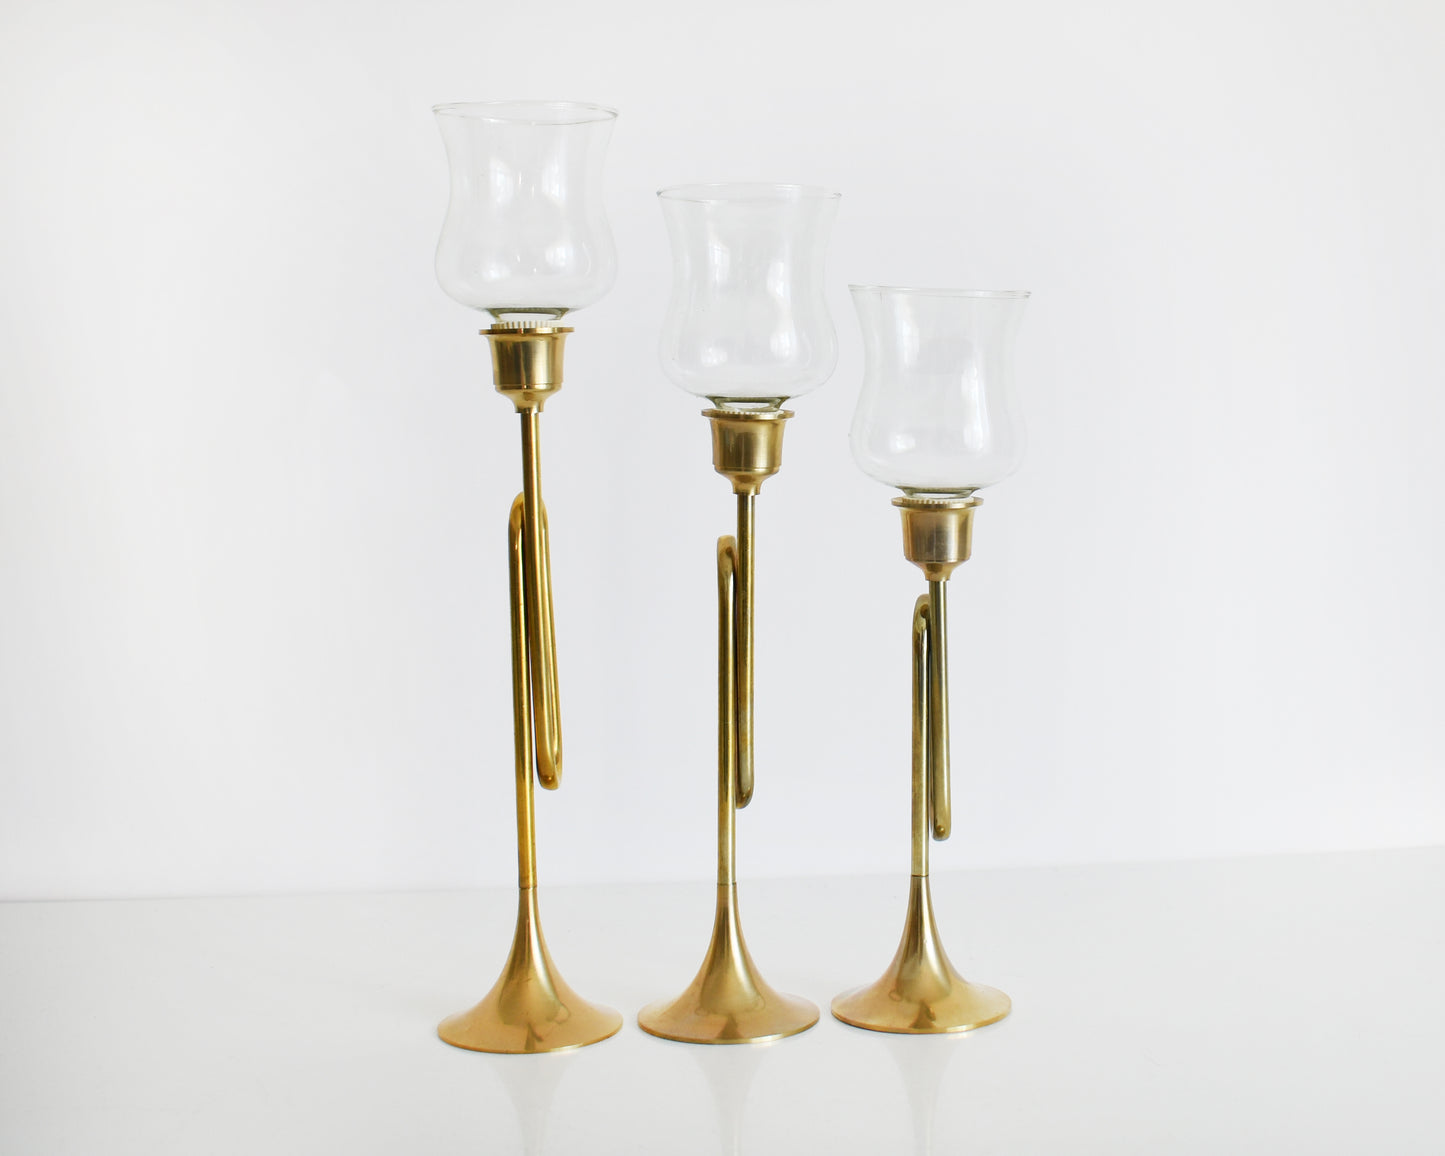 Side view of three vintage brass bugle/horn candlesticks that has clear class votives on top.